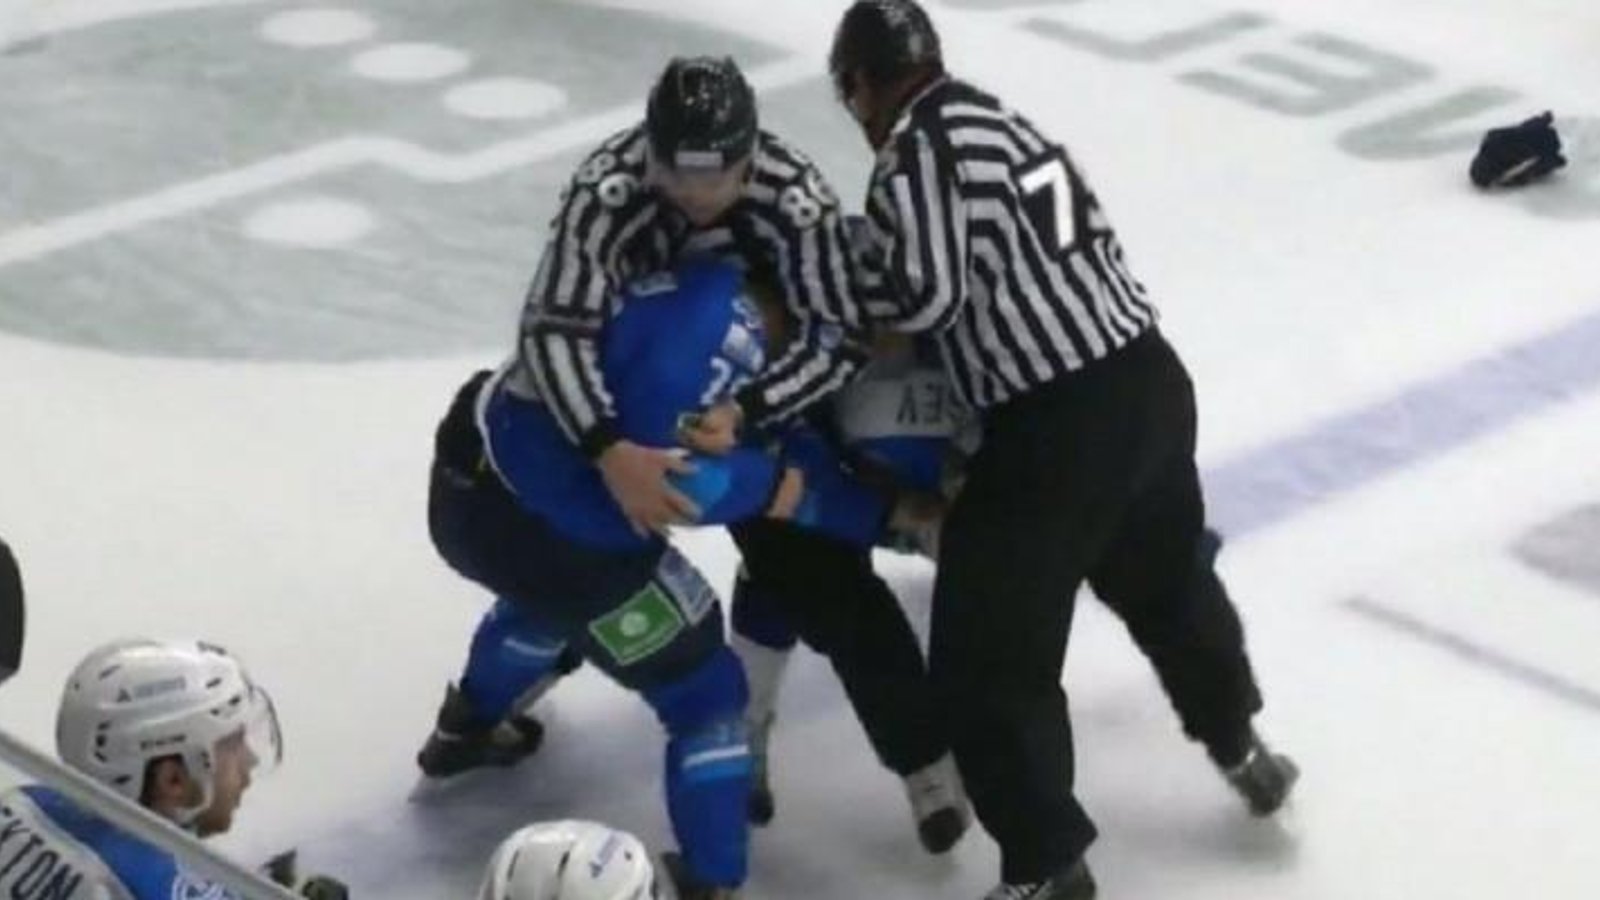 Police reports filled and charges forthcoming after insane incident in Russian hockey.